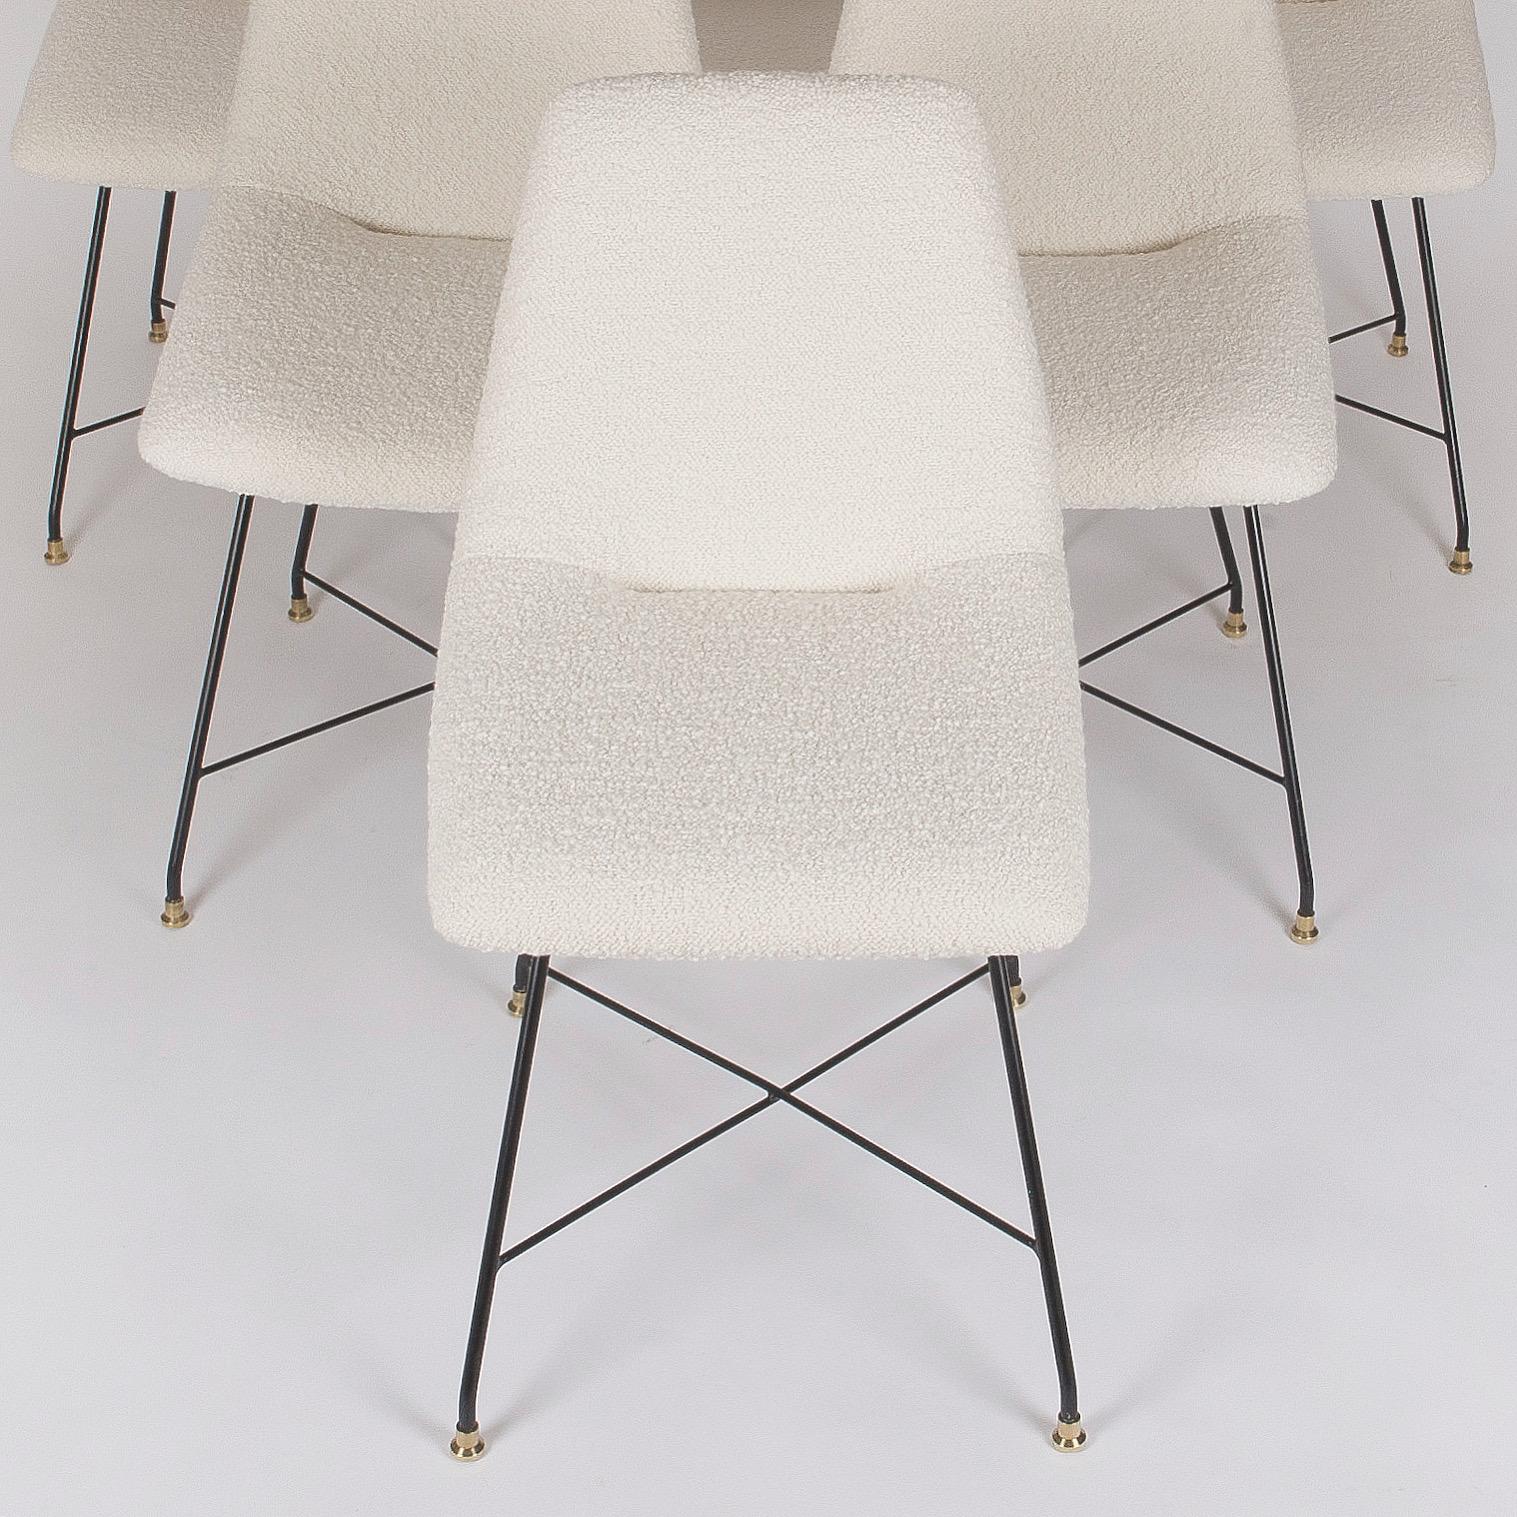 Italian Set of Six Bouclé 'Aster' Chairs by Augusto Bozzi for Saporiti, Italy, C.1956